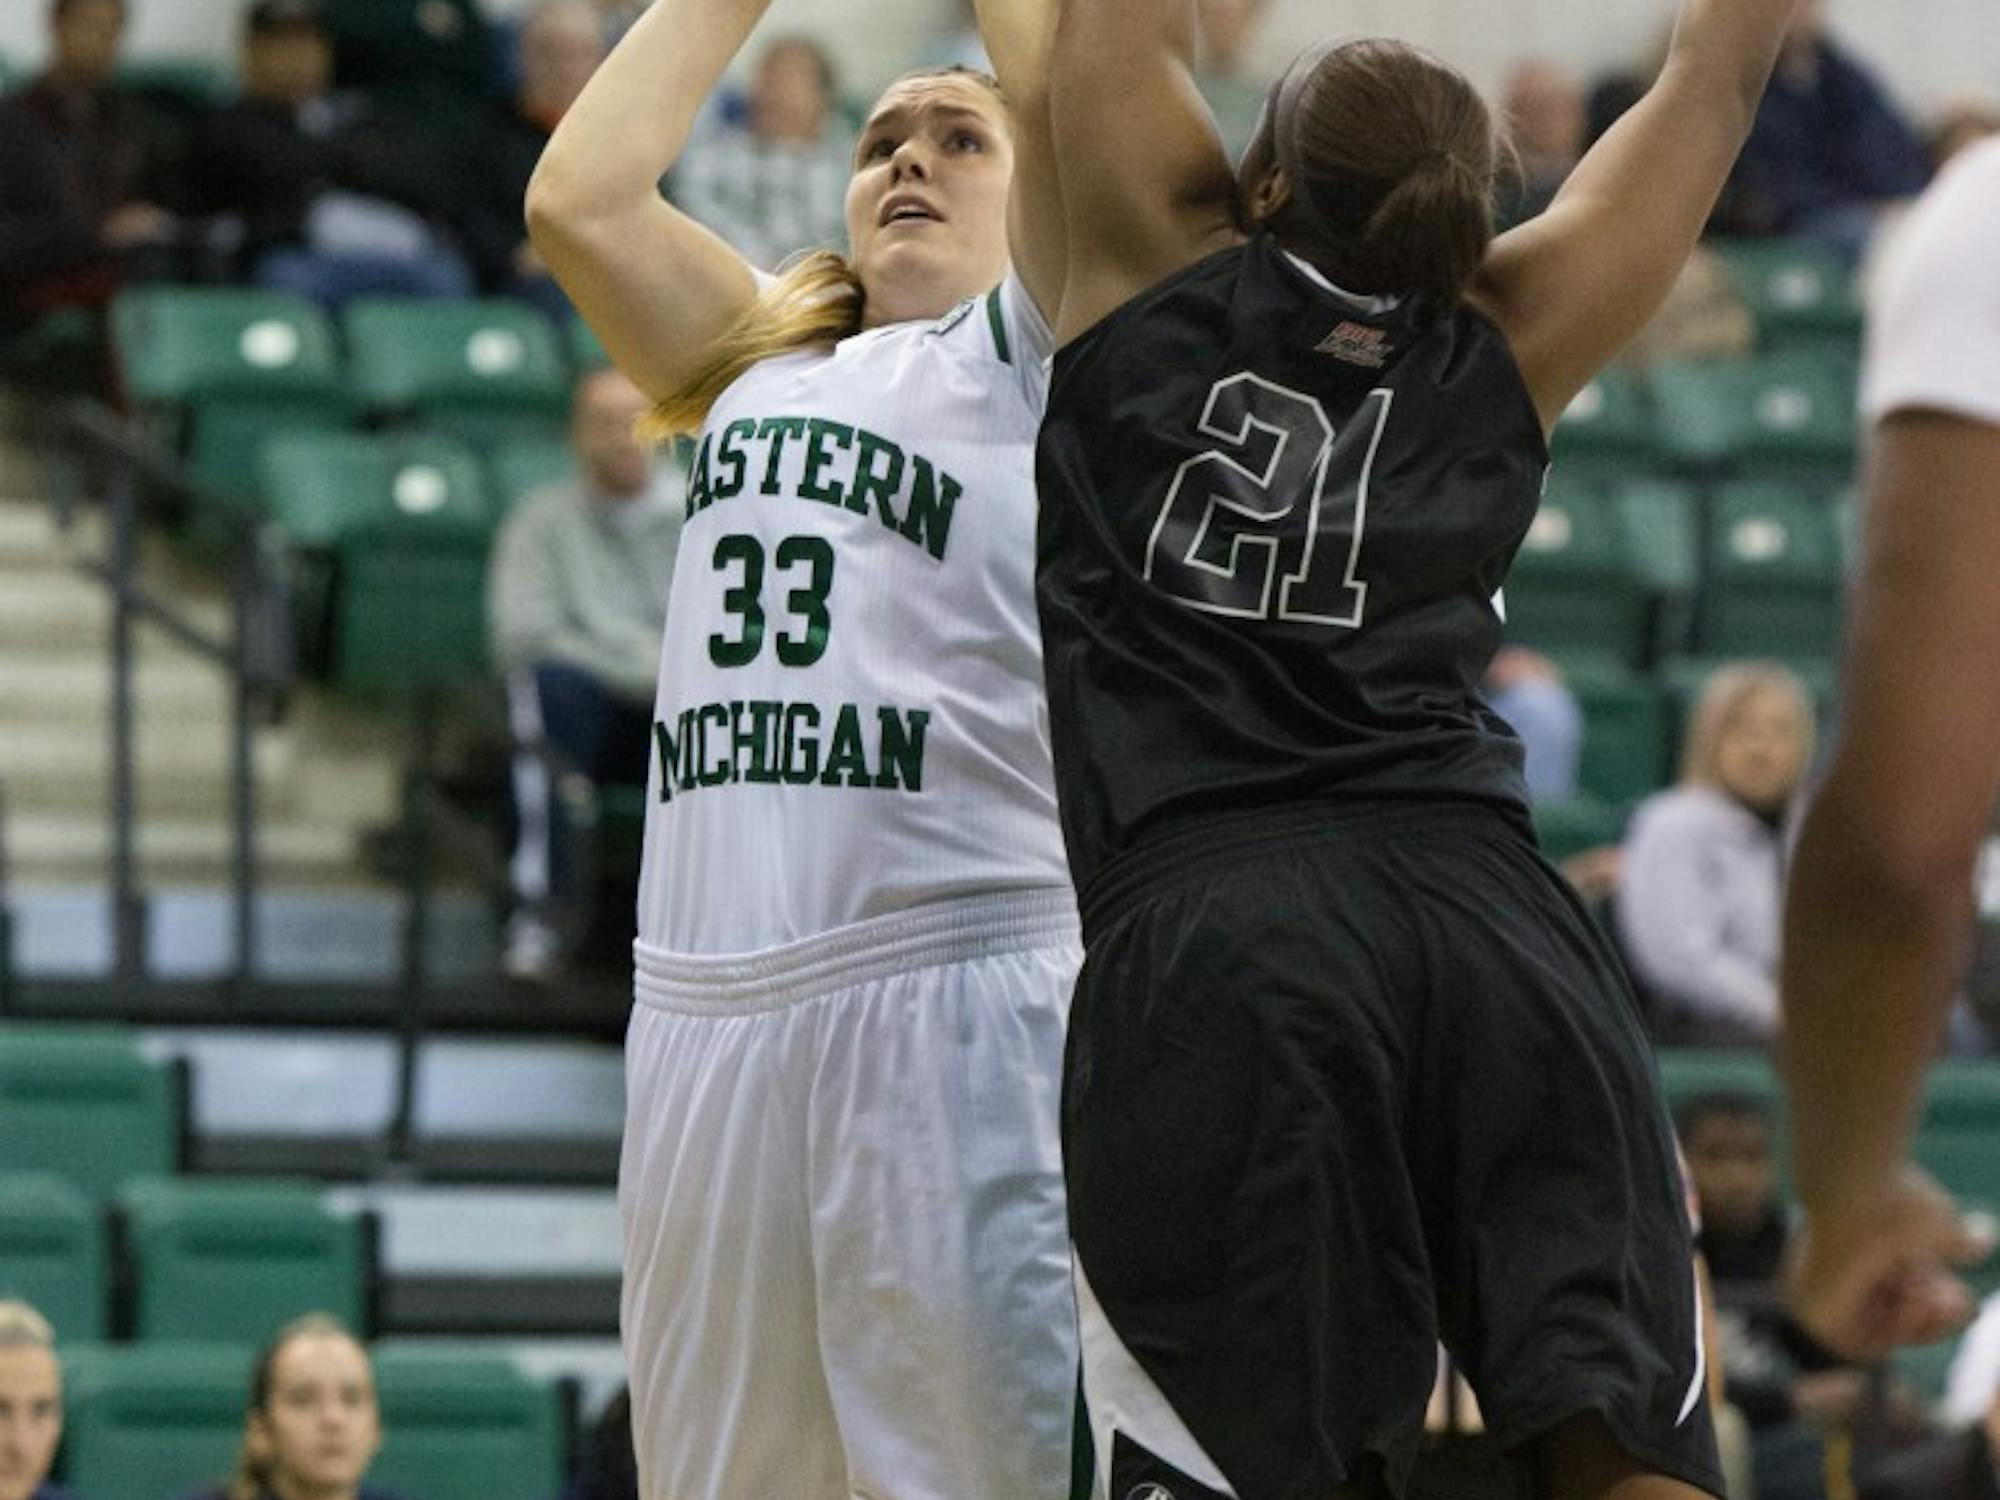 EMU forward Olivia Fouty had a double-double in last nights 81-76 overtime win over Butler.(33) had a double-double in last nights 81-76 overtime win over Butler.